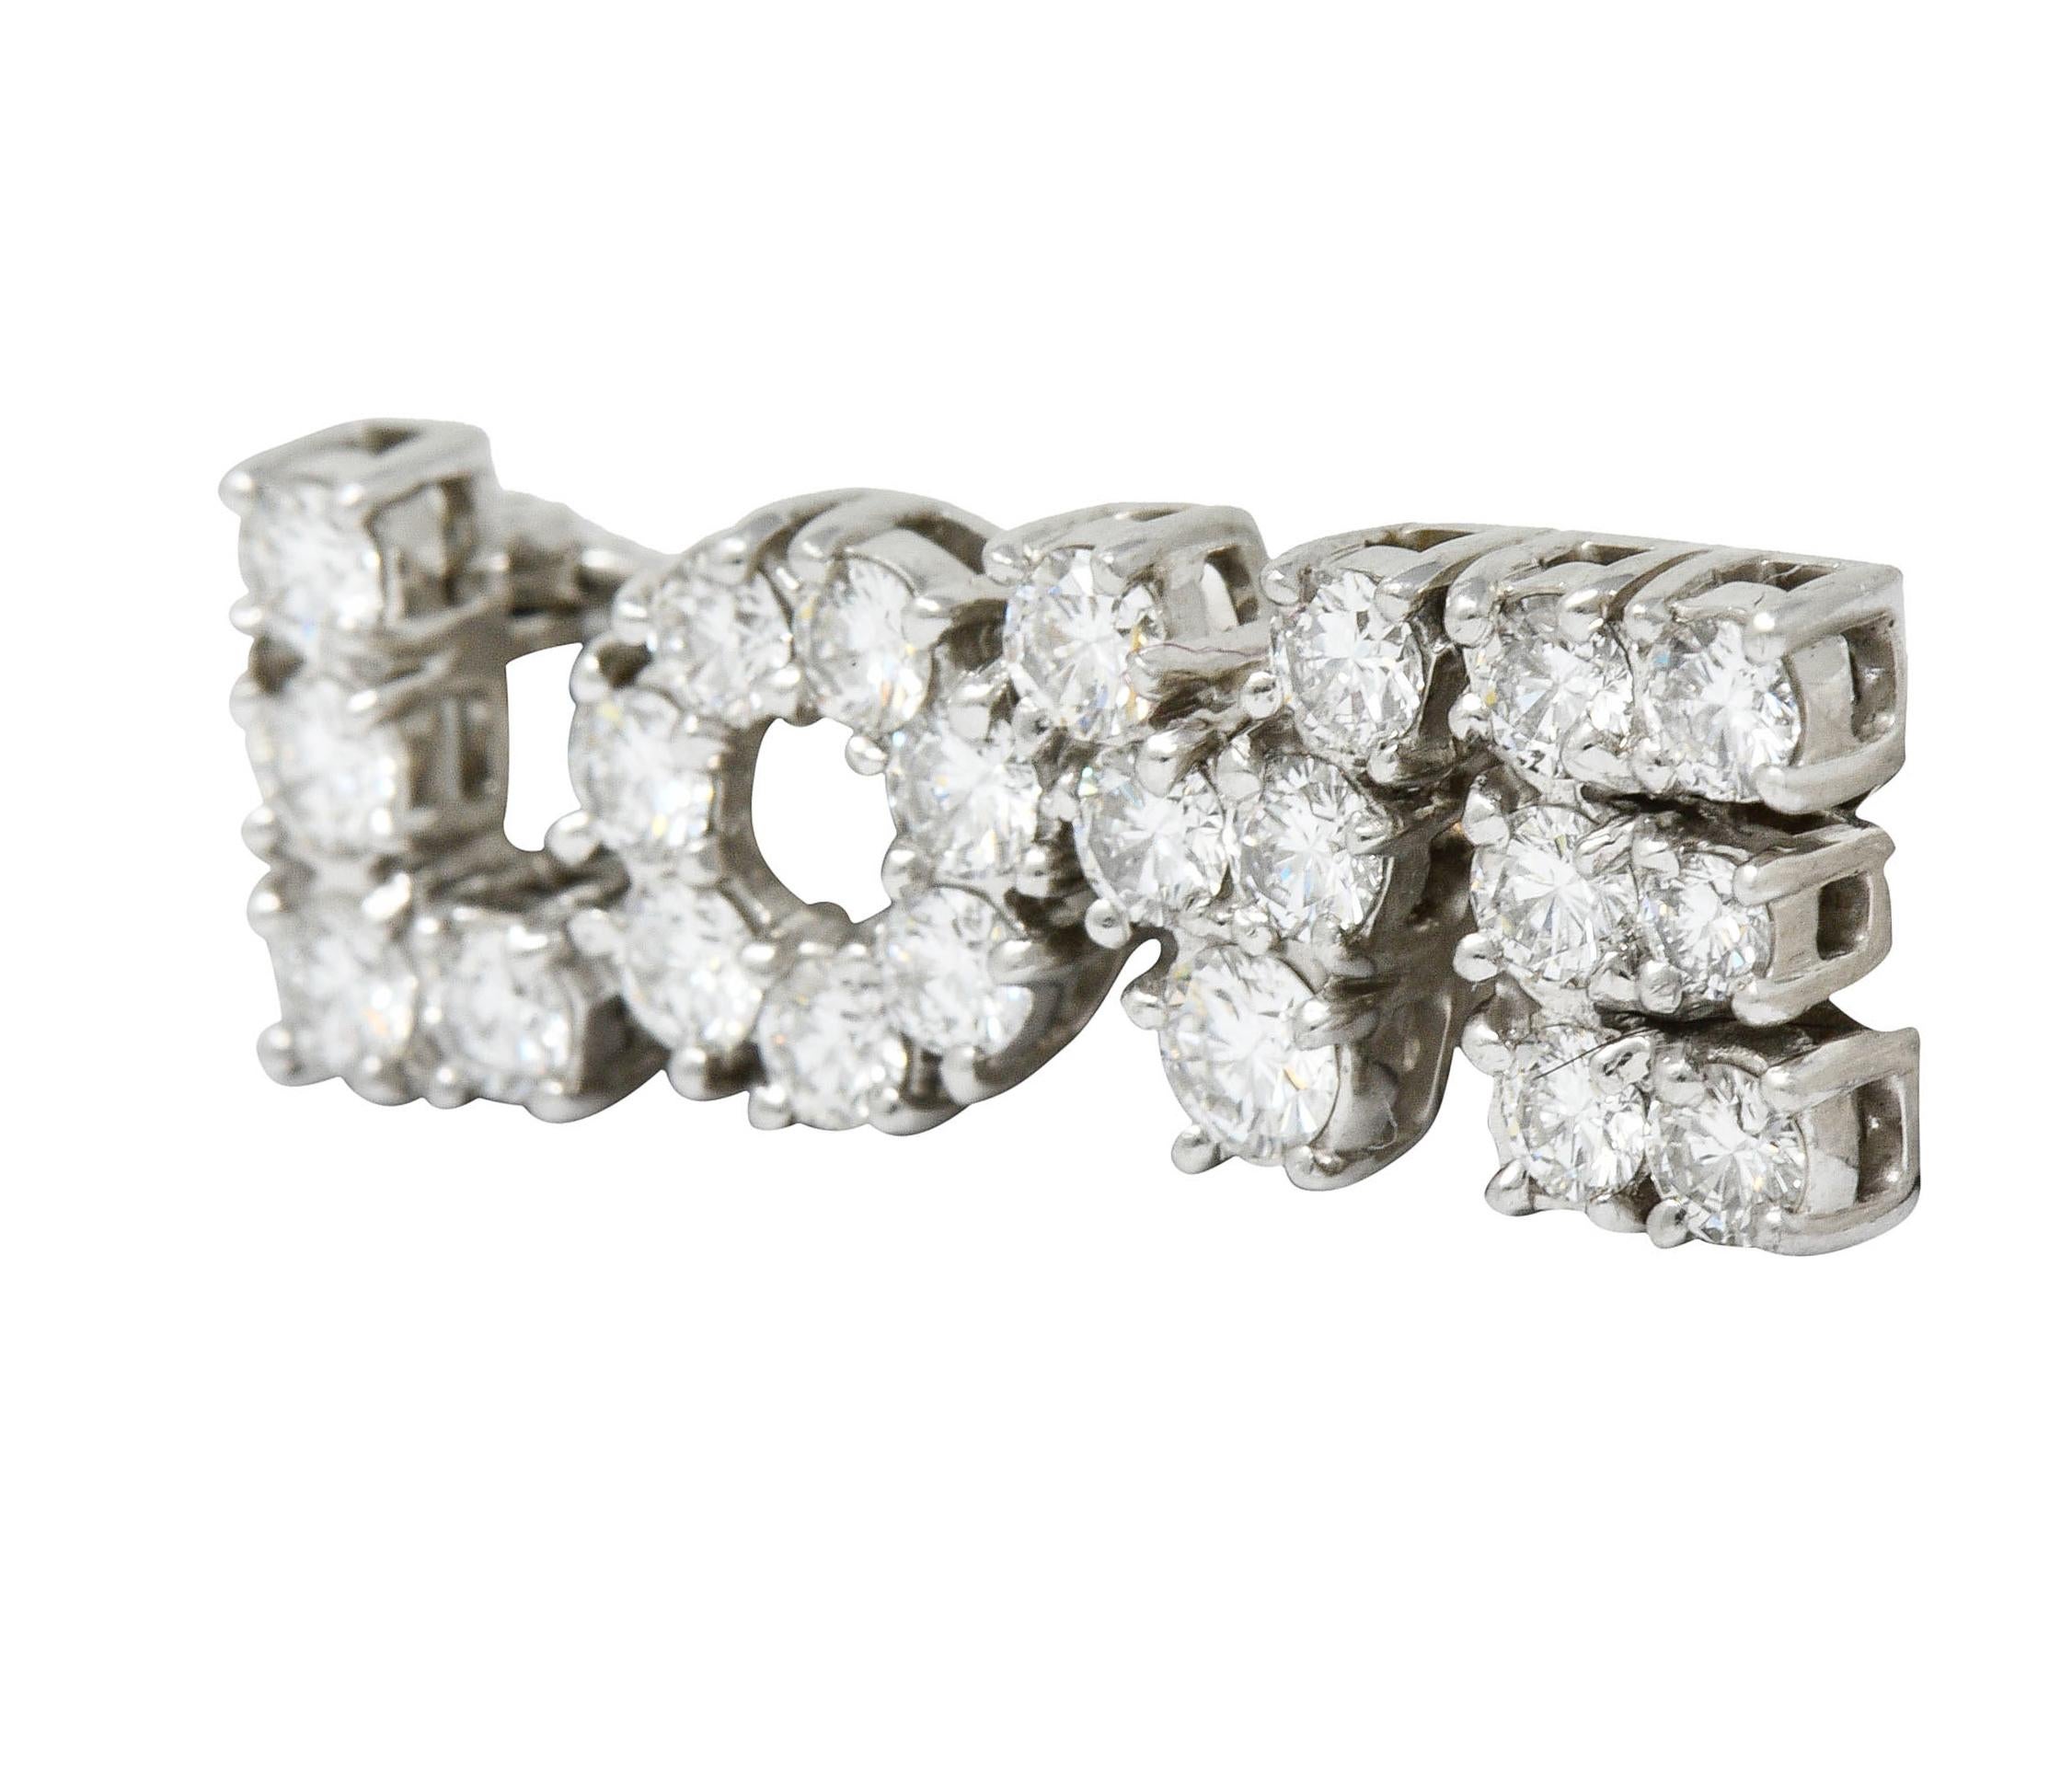 Brooch is comprised of prong set round brilliant cut diamonds spelling the word 'LOVE'

Weighing in total approximately 2.16 carats with F/G color and VS clarity

Completed by pin stem with locking closure

Stamped for platinum

Fully signed Tiffany